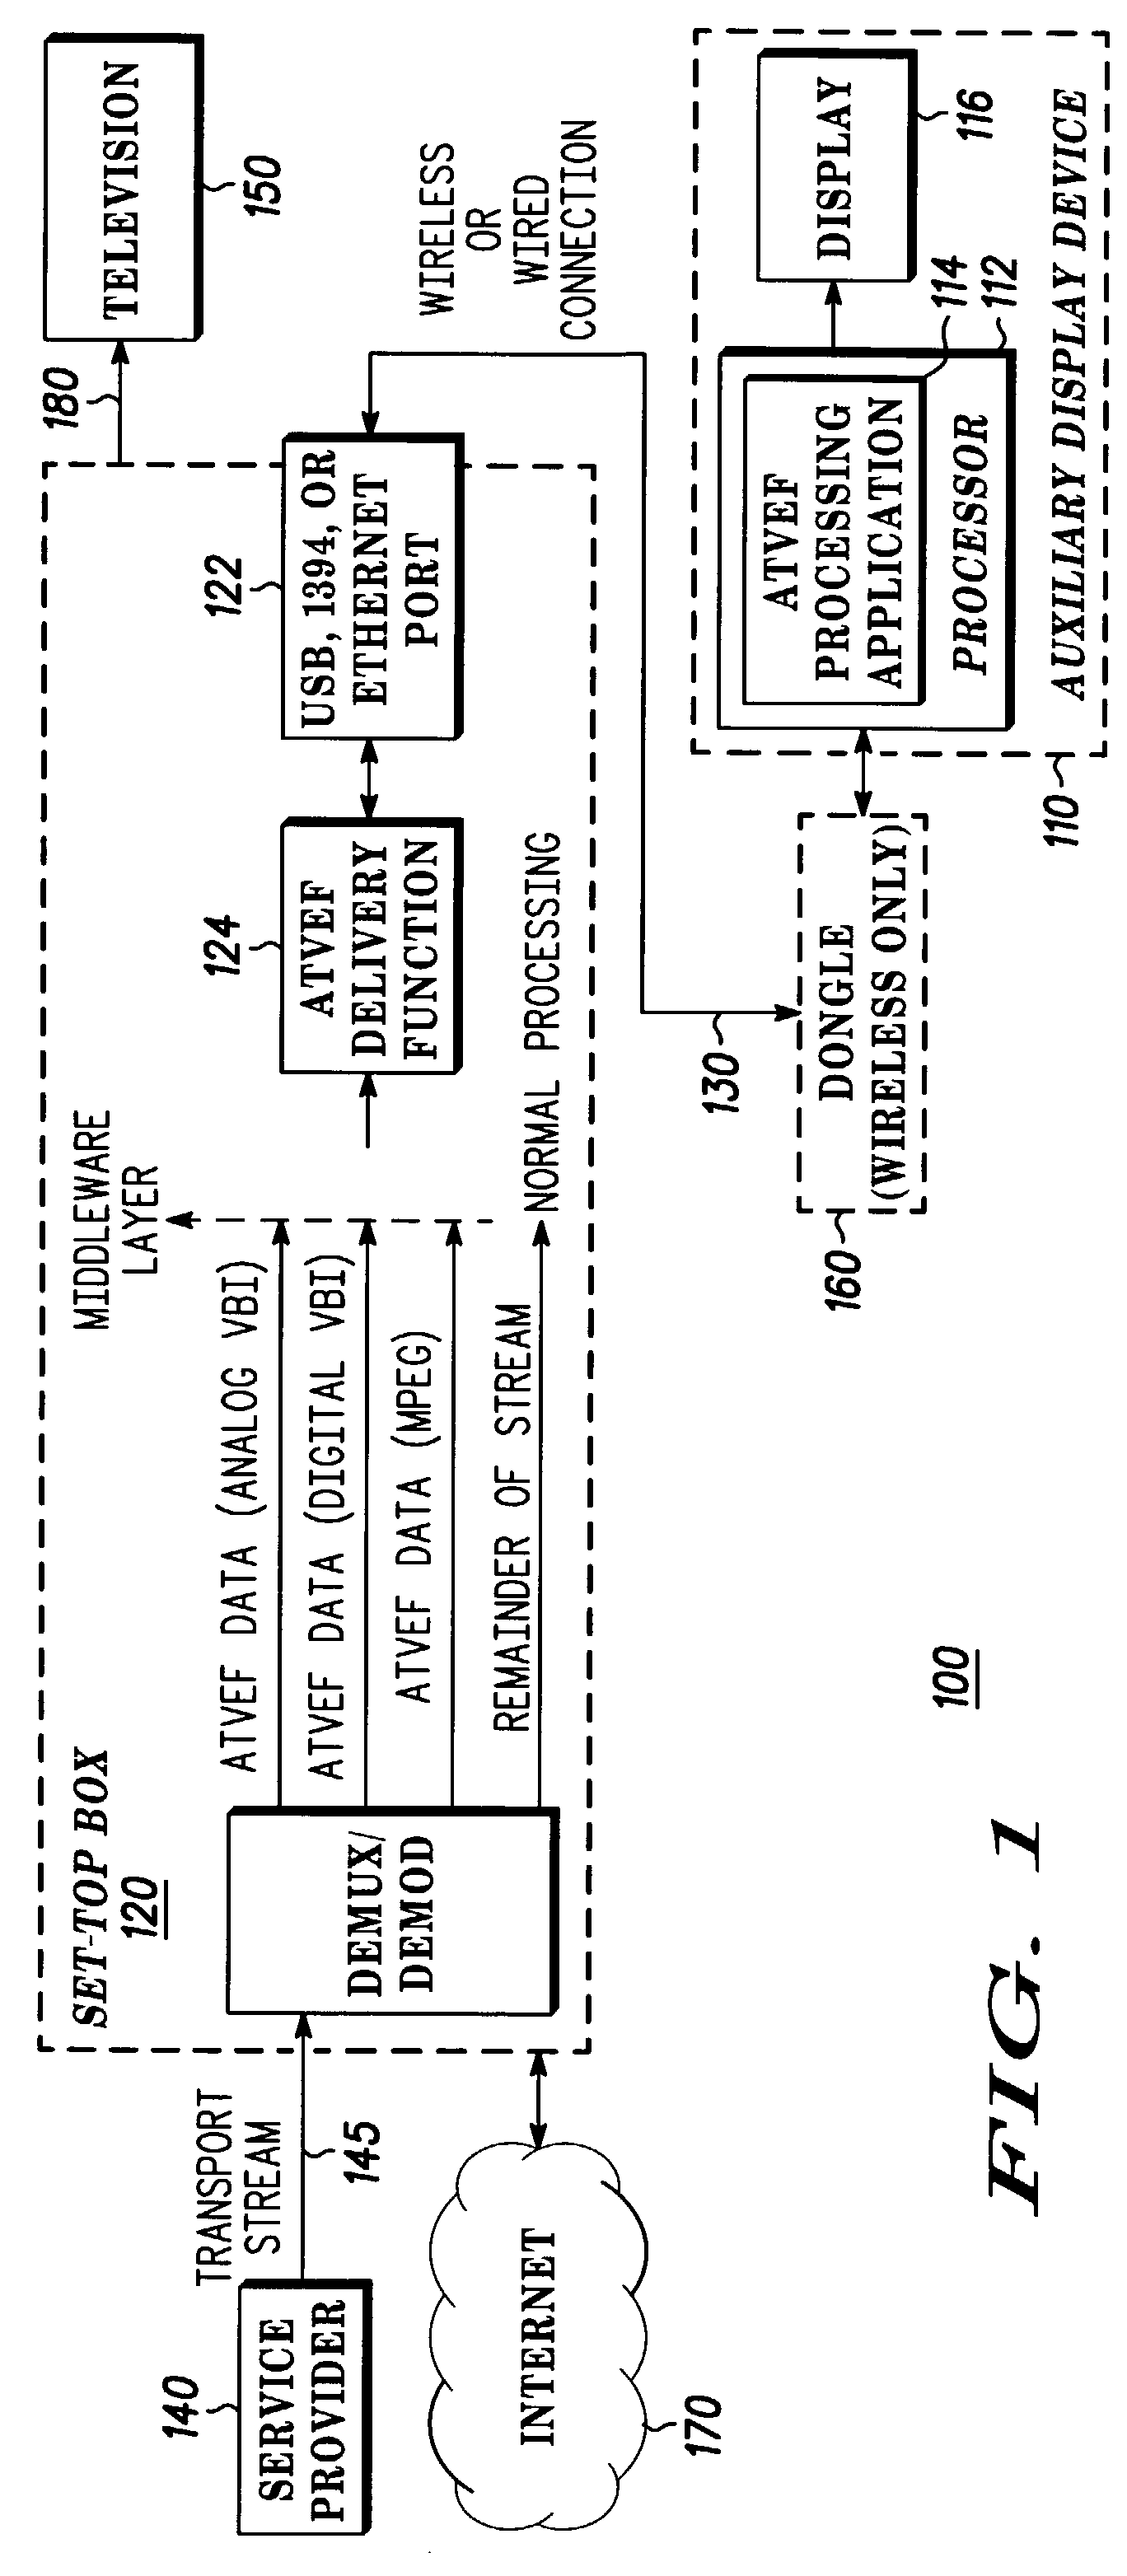 Method and apparatus for forwarding television channel video image snapshots to an auxiliary display device